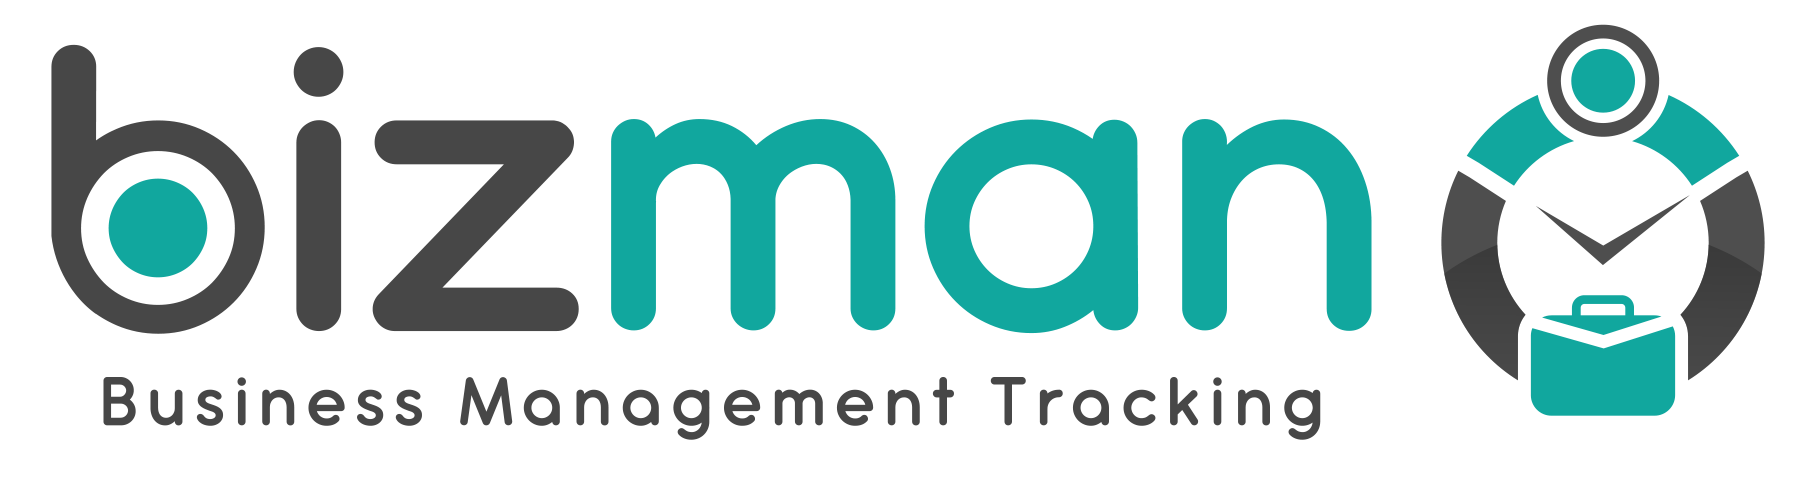 Business Management Tracking